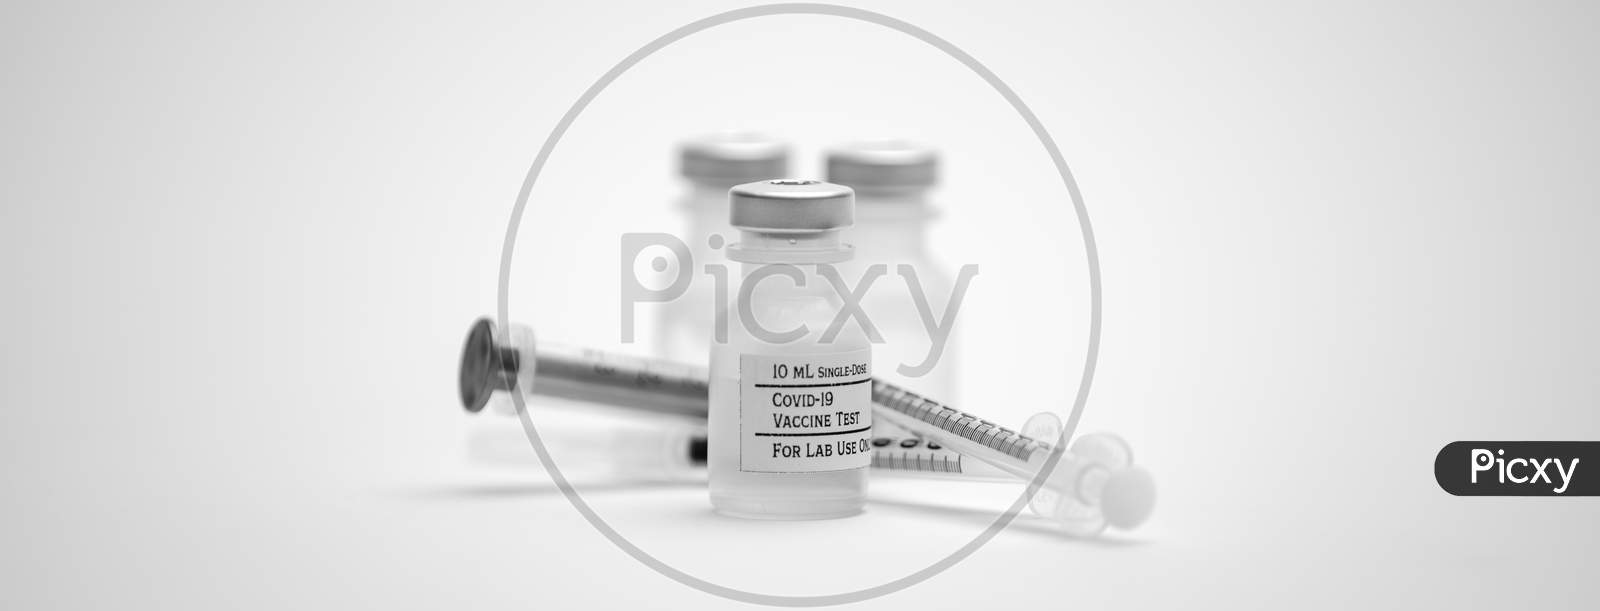 Three Covid-19 Test Vaccine Vials And Three Syringes Isolated On A White Background.